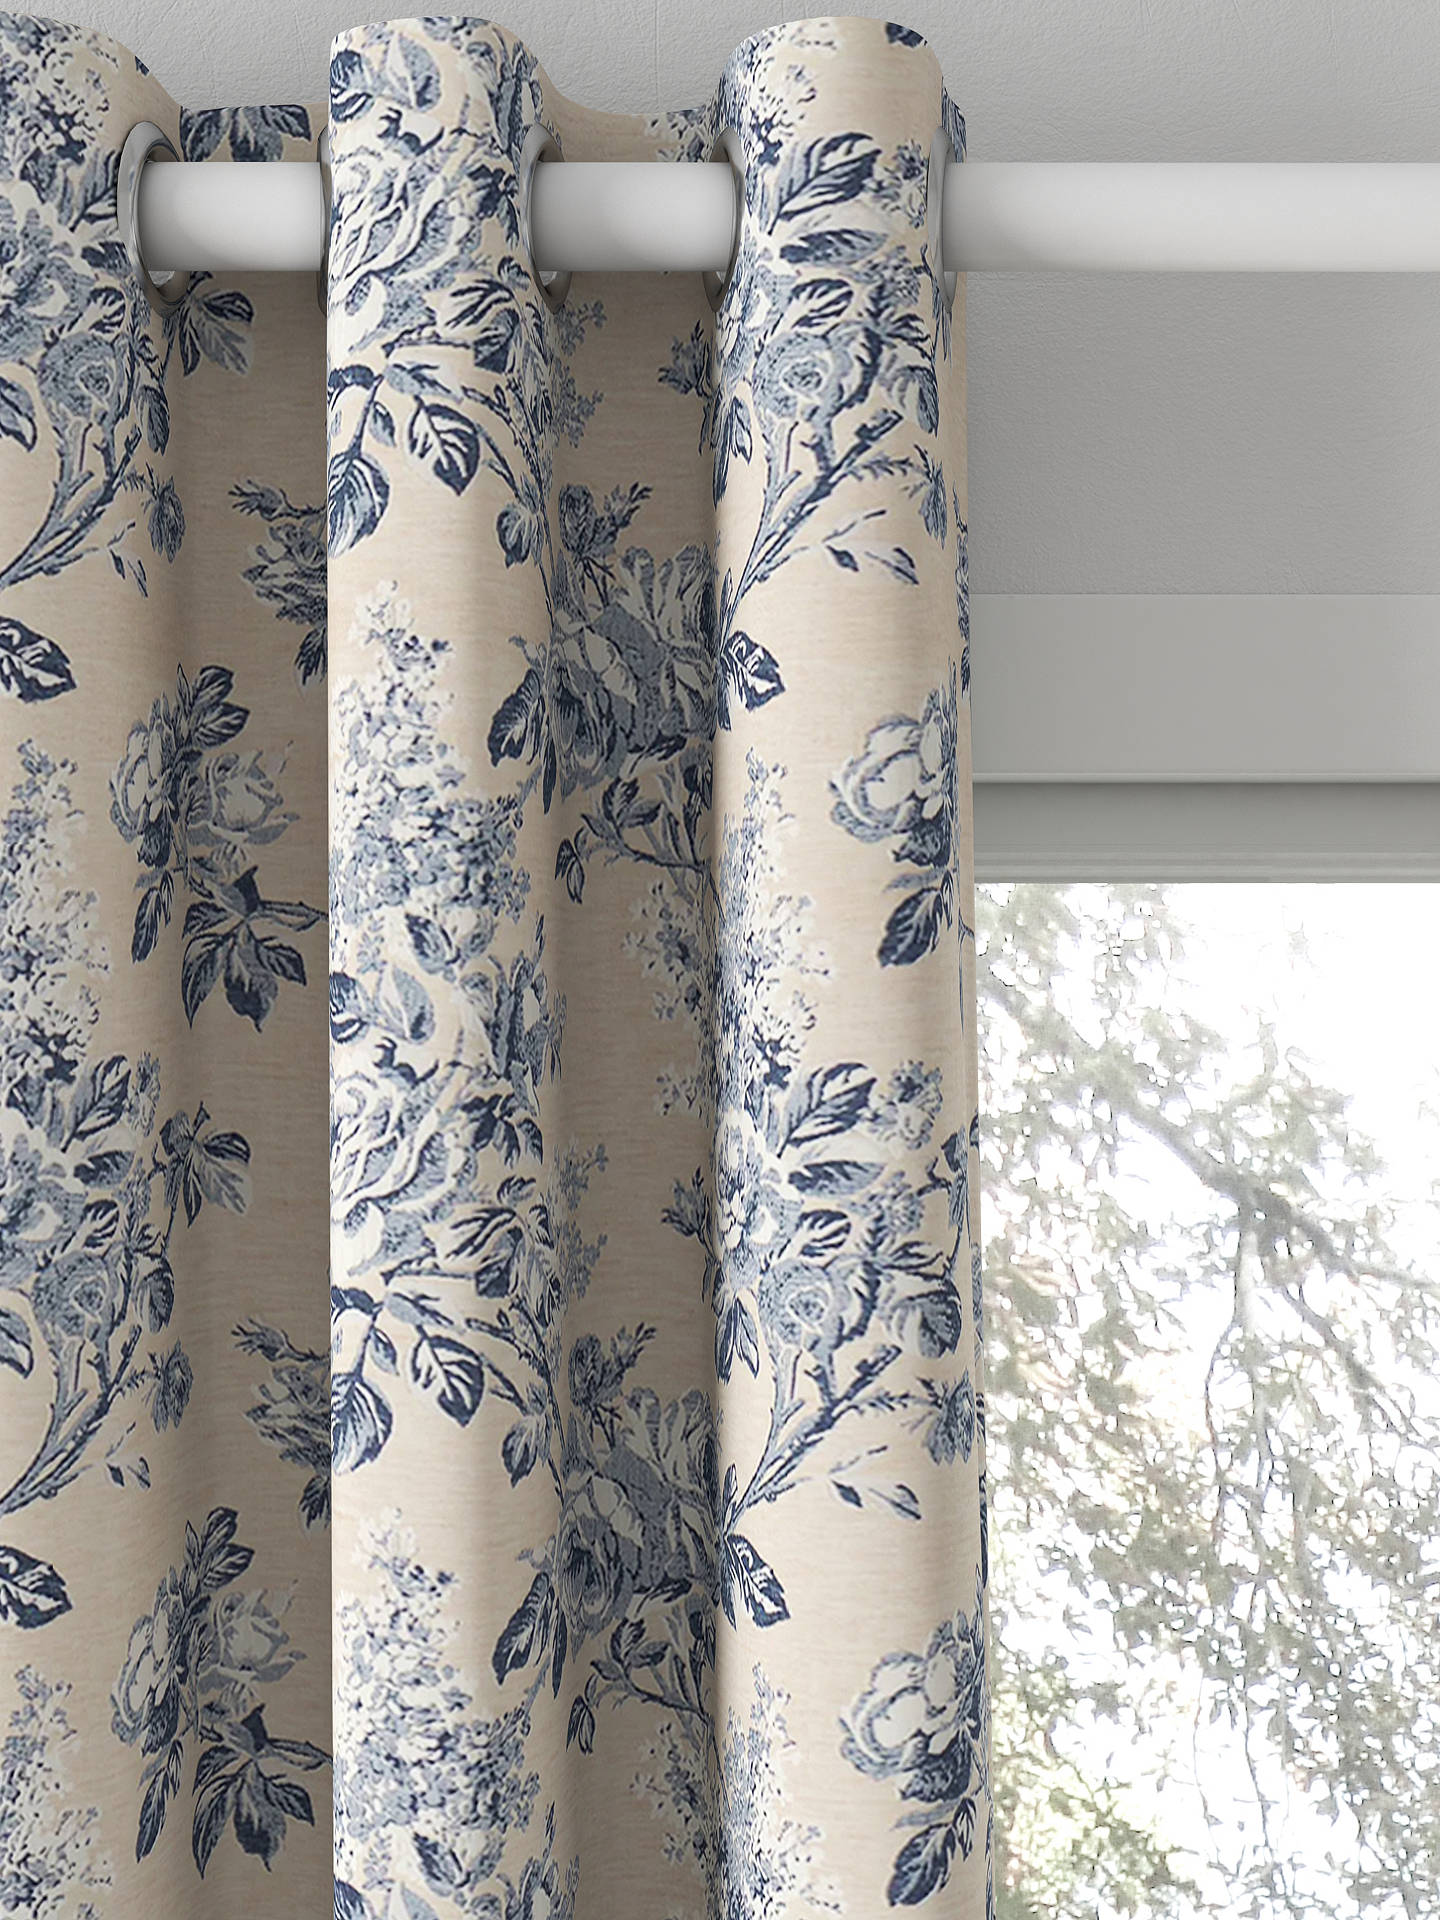 Sanderson Sorilla Damask Made to Measure Curtains or Roman Blind ...